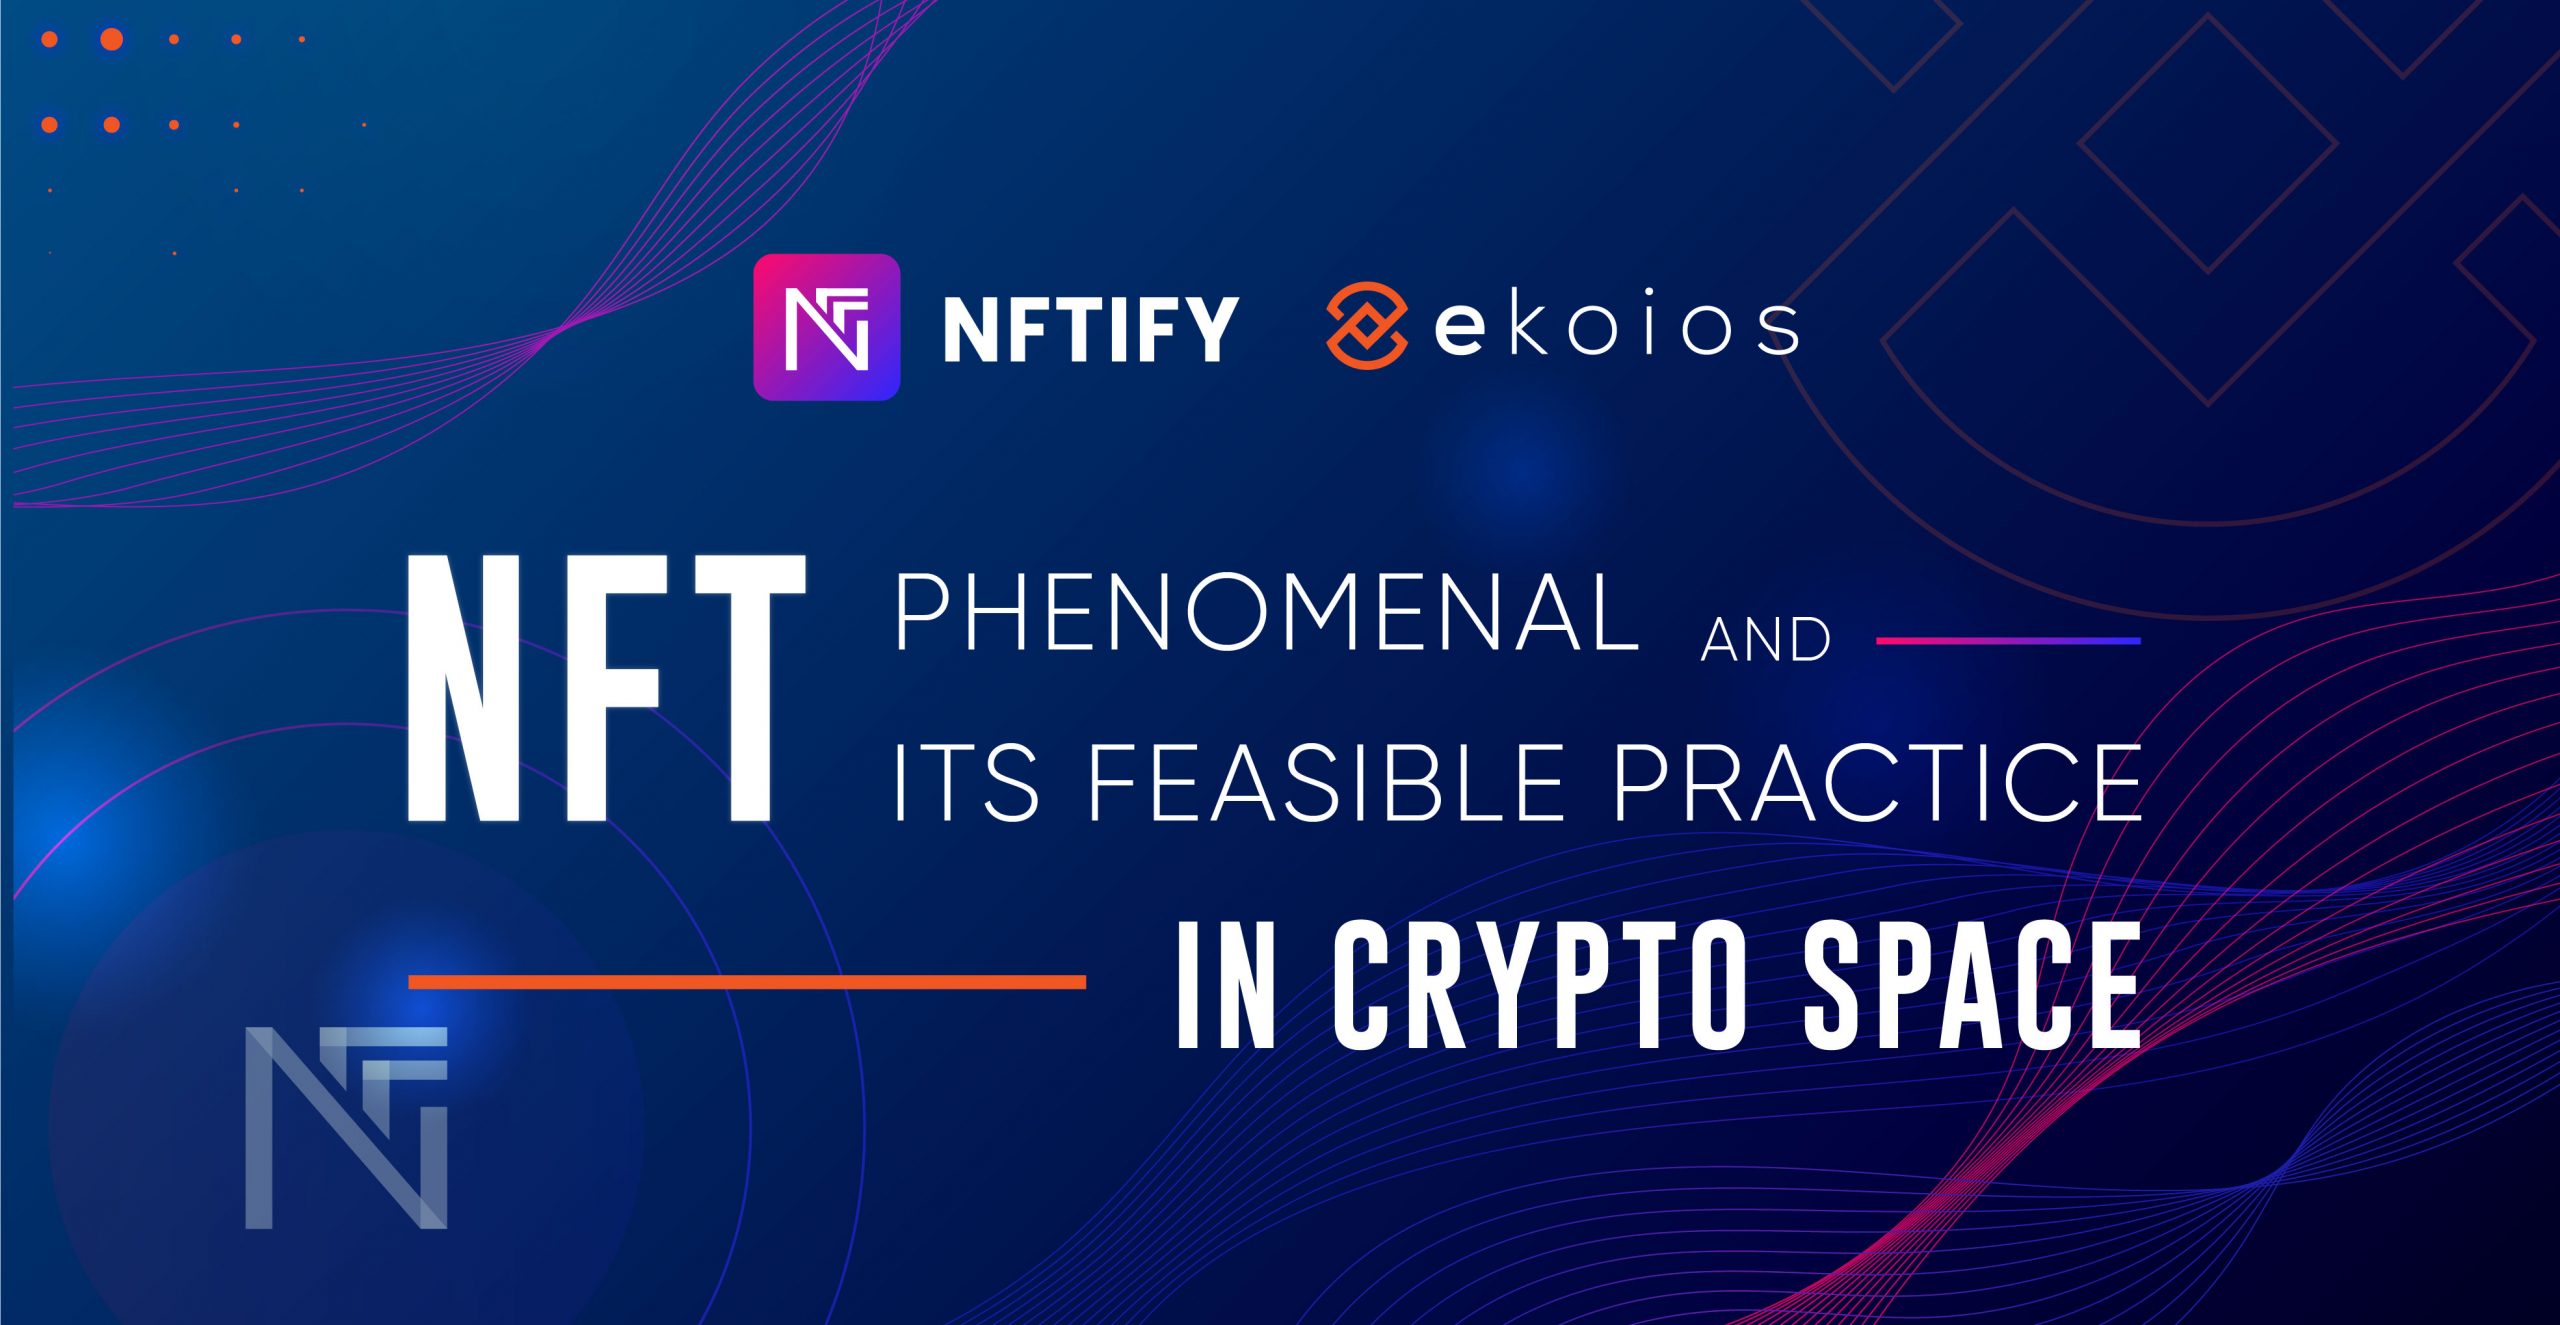 NFT phenomenal and its feasible practice in crypto space